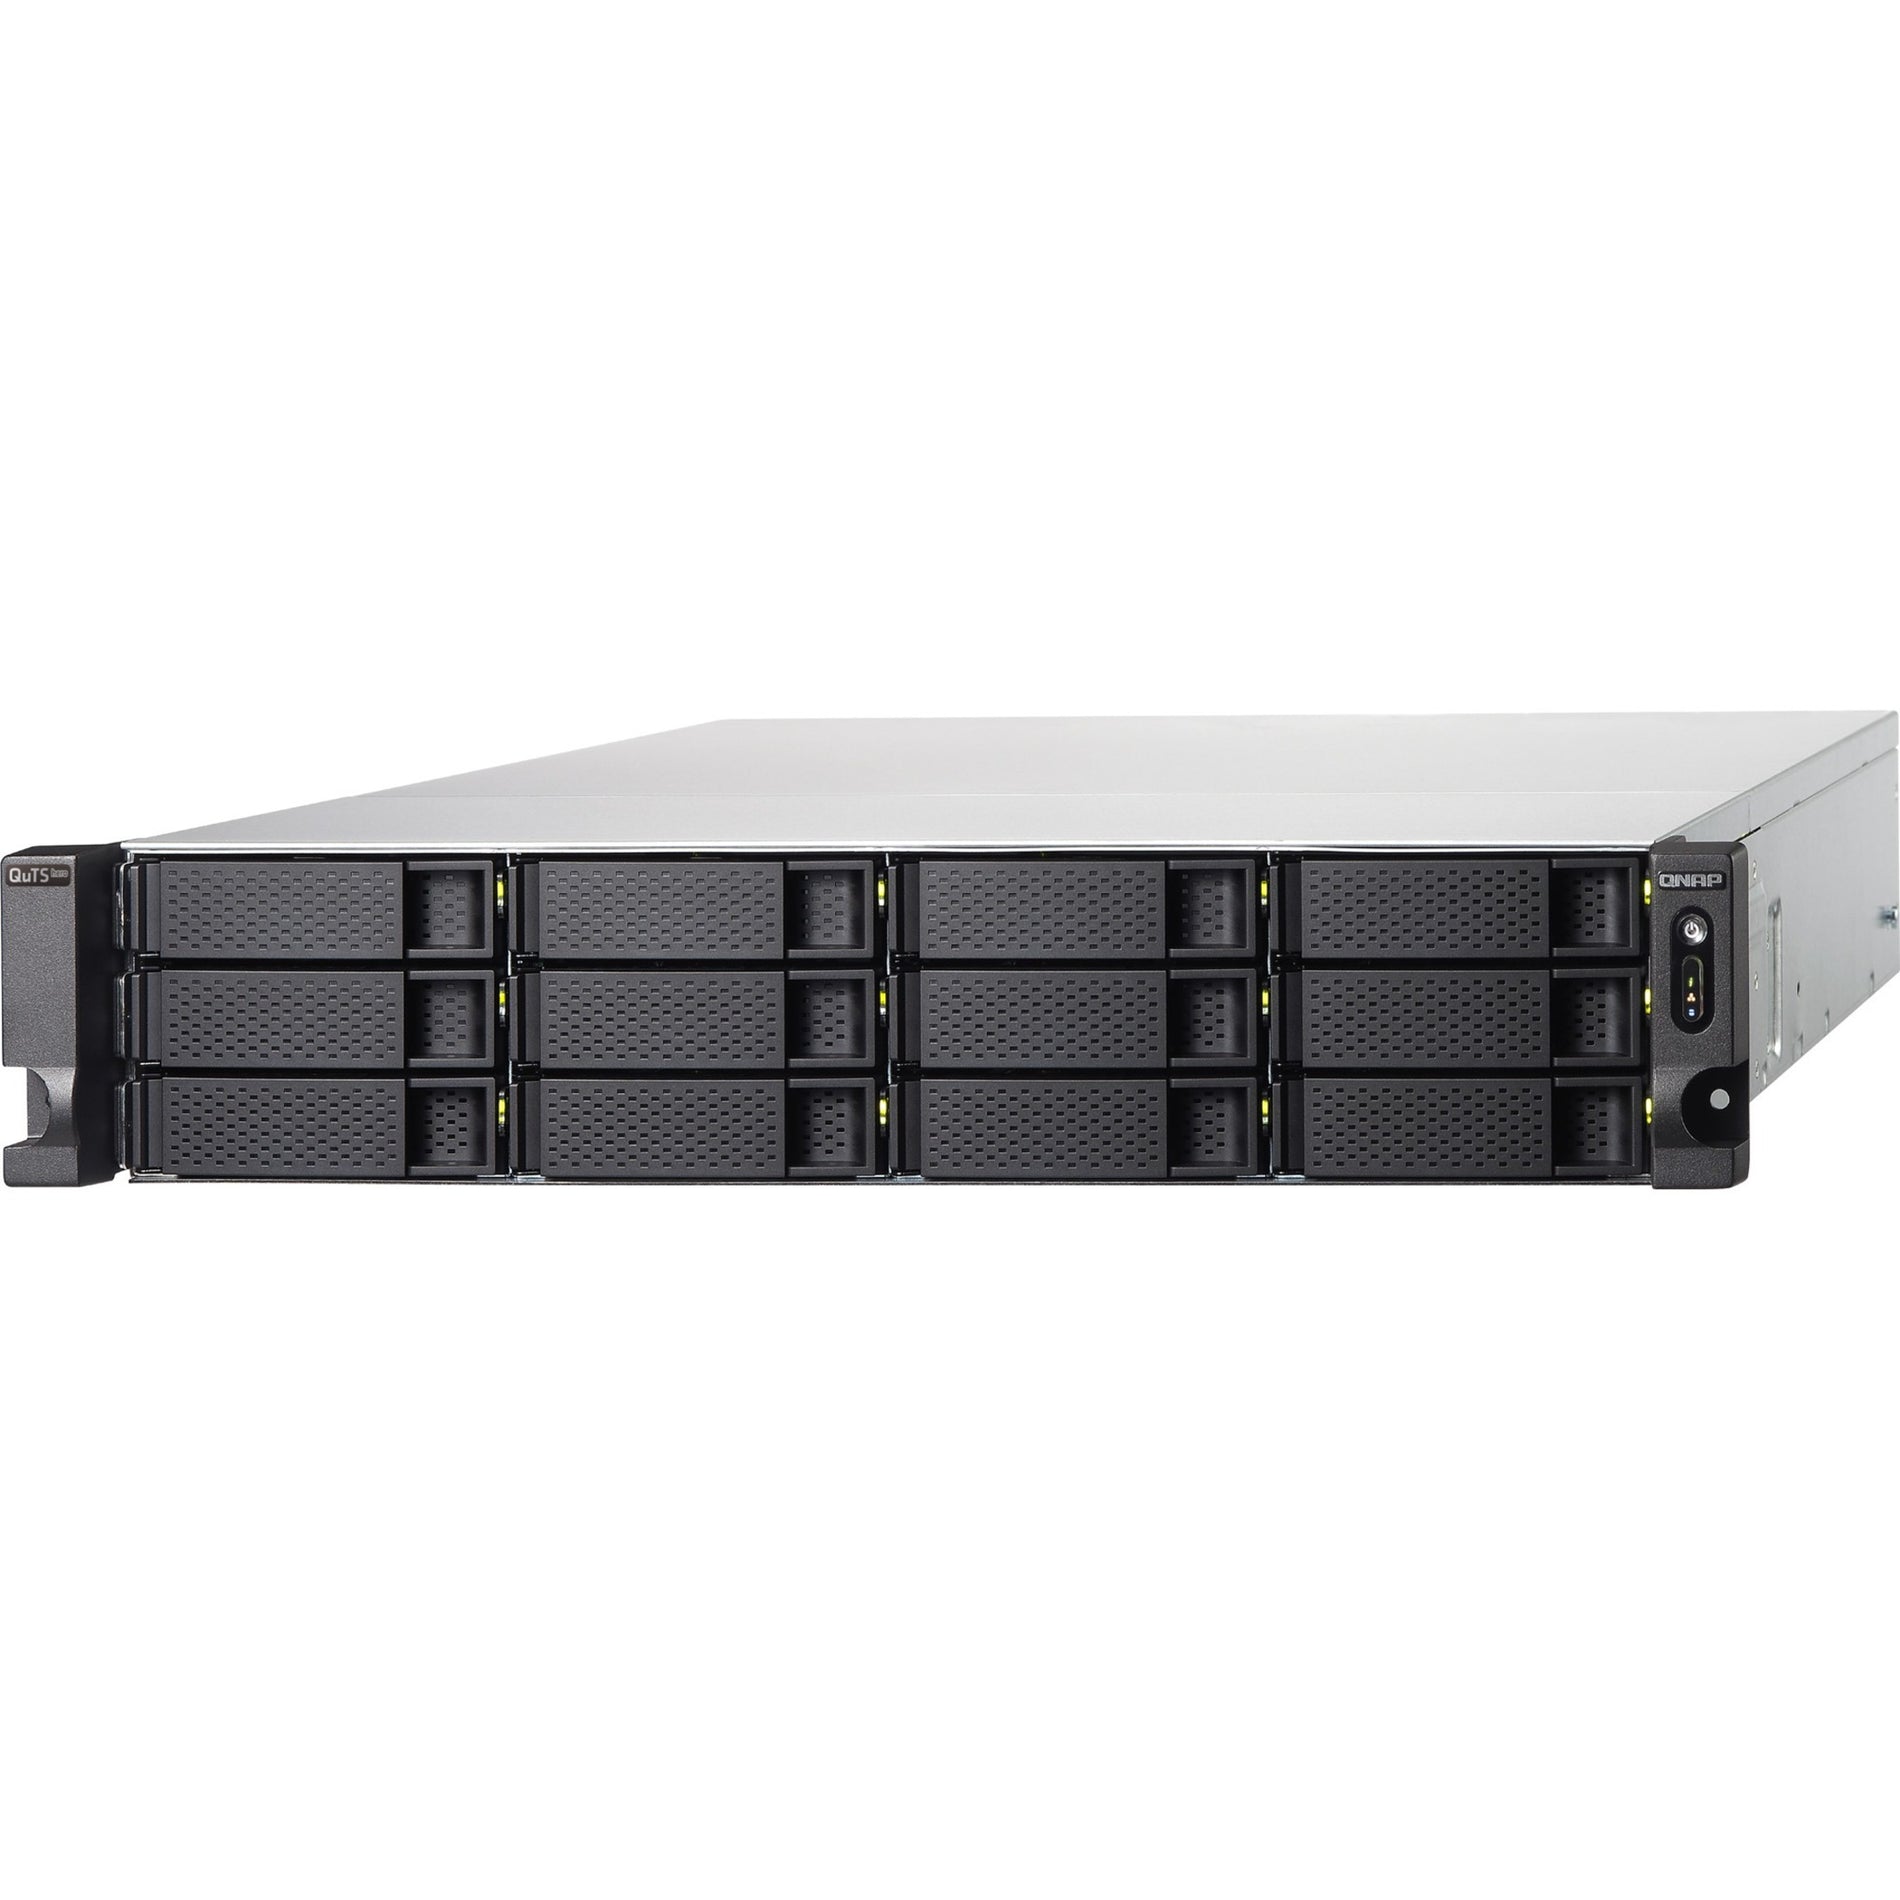 QNAP TS-H1886XU-RP-R2-D1622-32G SAN/NAS Storage System, 2U Rack-mountable, 32GB DDR4 RAM, 12 HDD/18 SSD Support